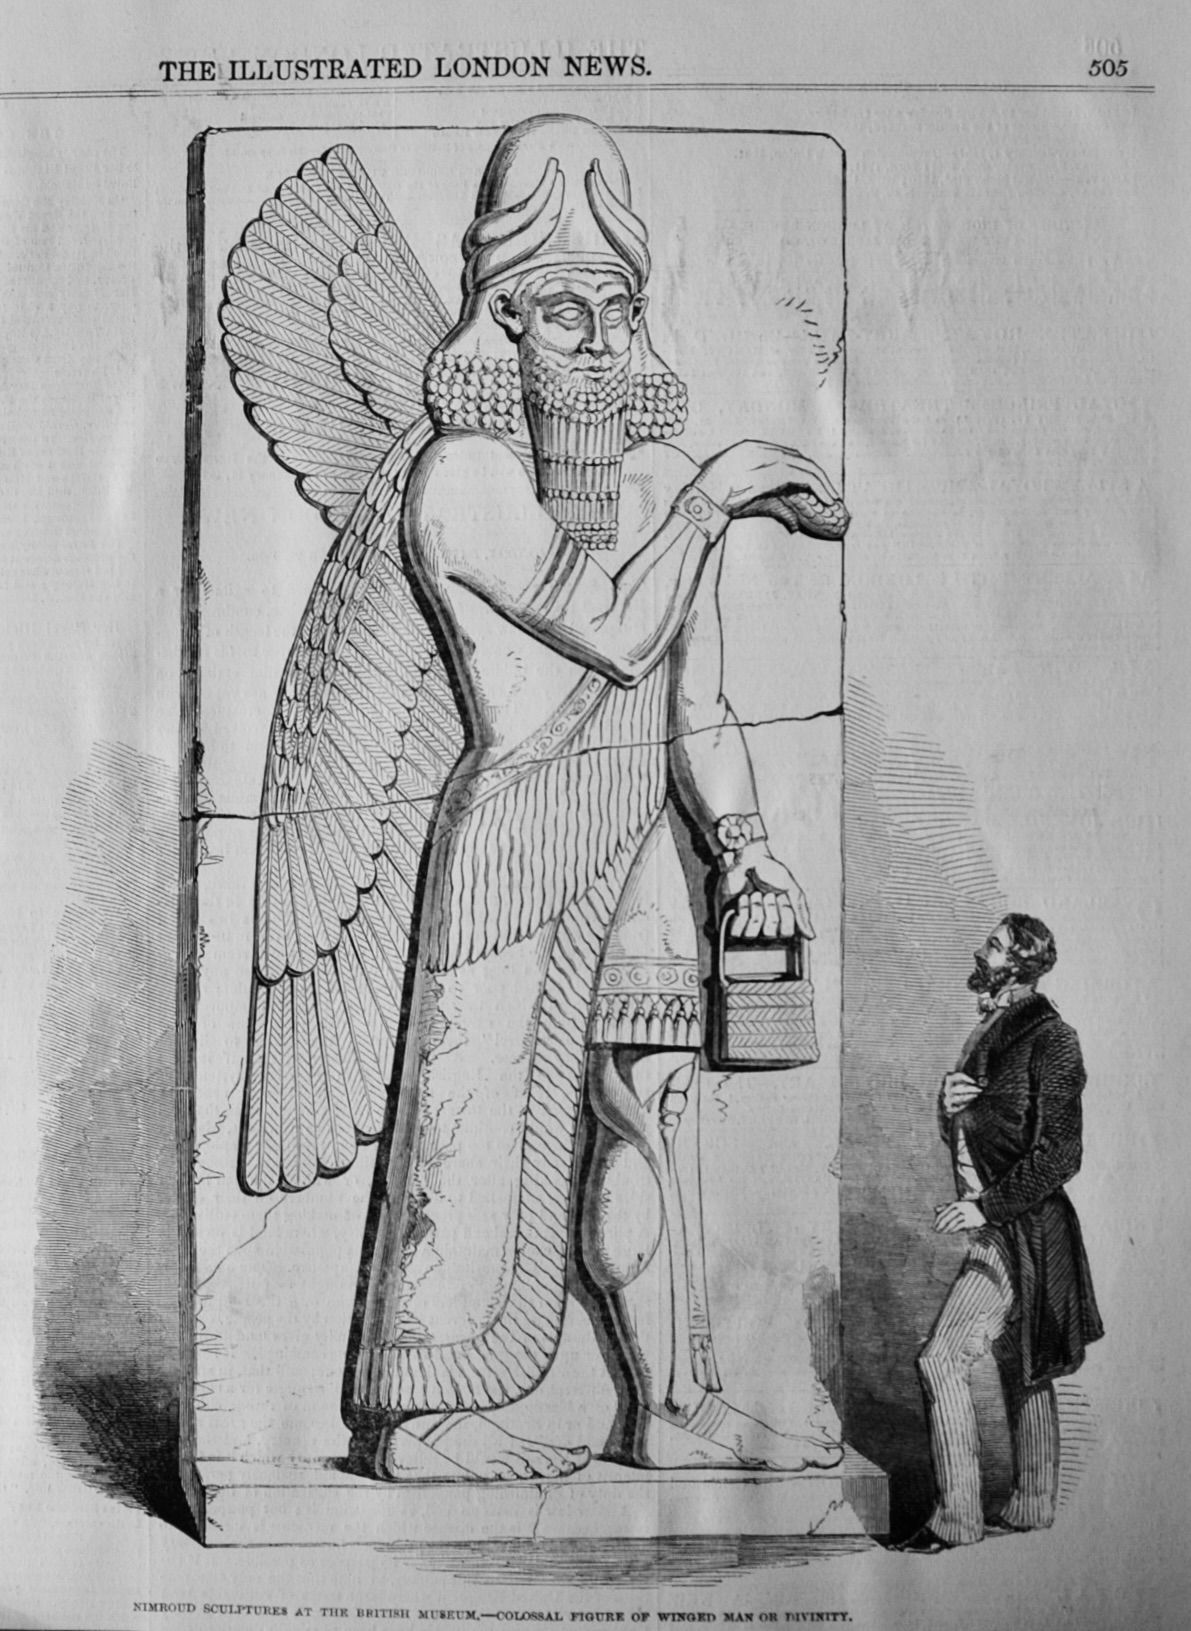 Nimroud Sculptures at the British Museum.- Colossal Figure of Winged Man or